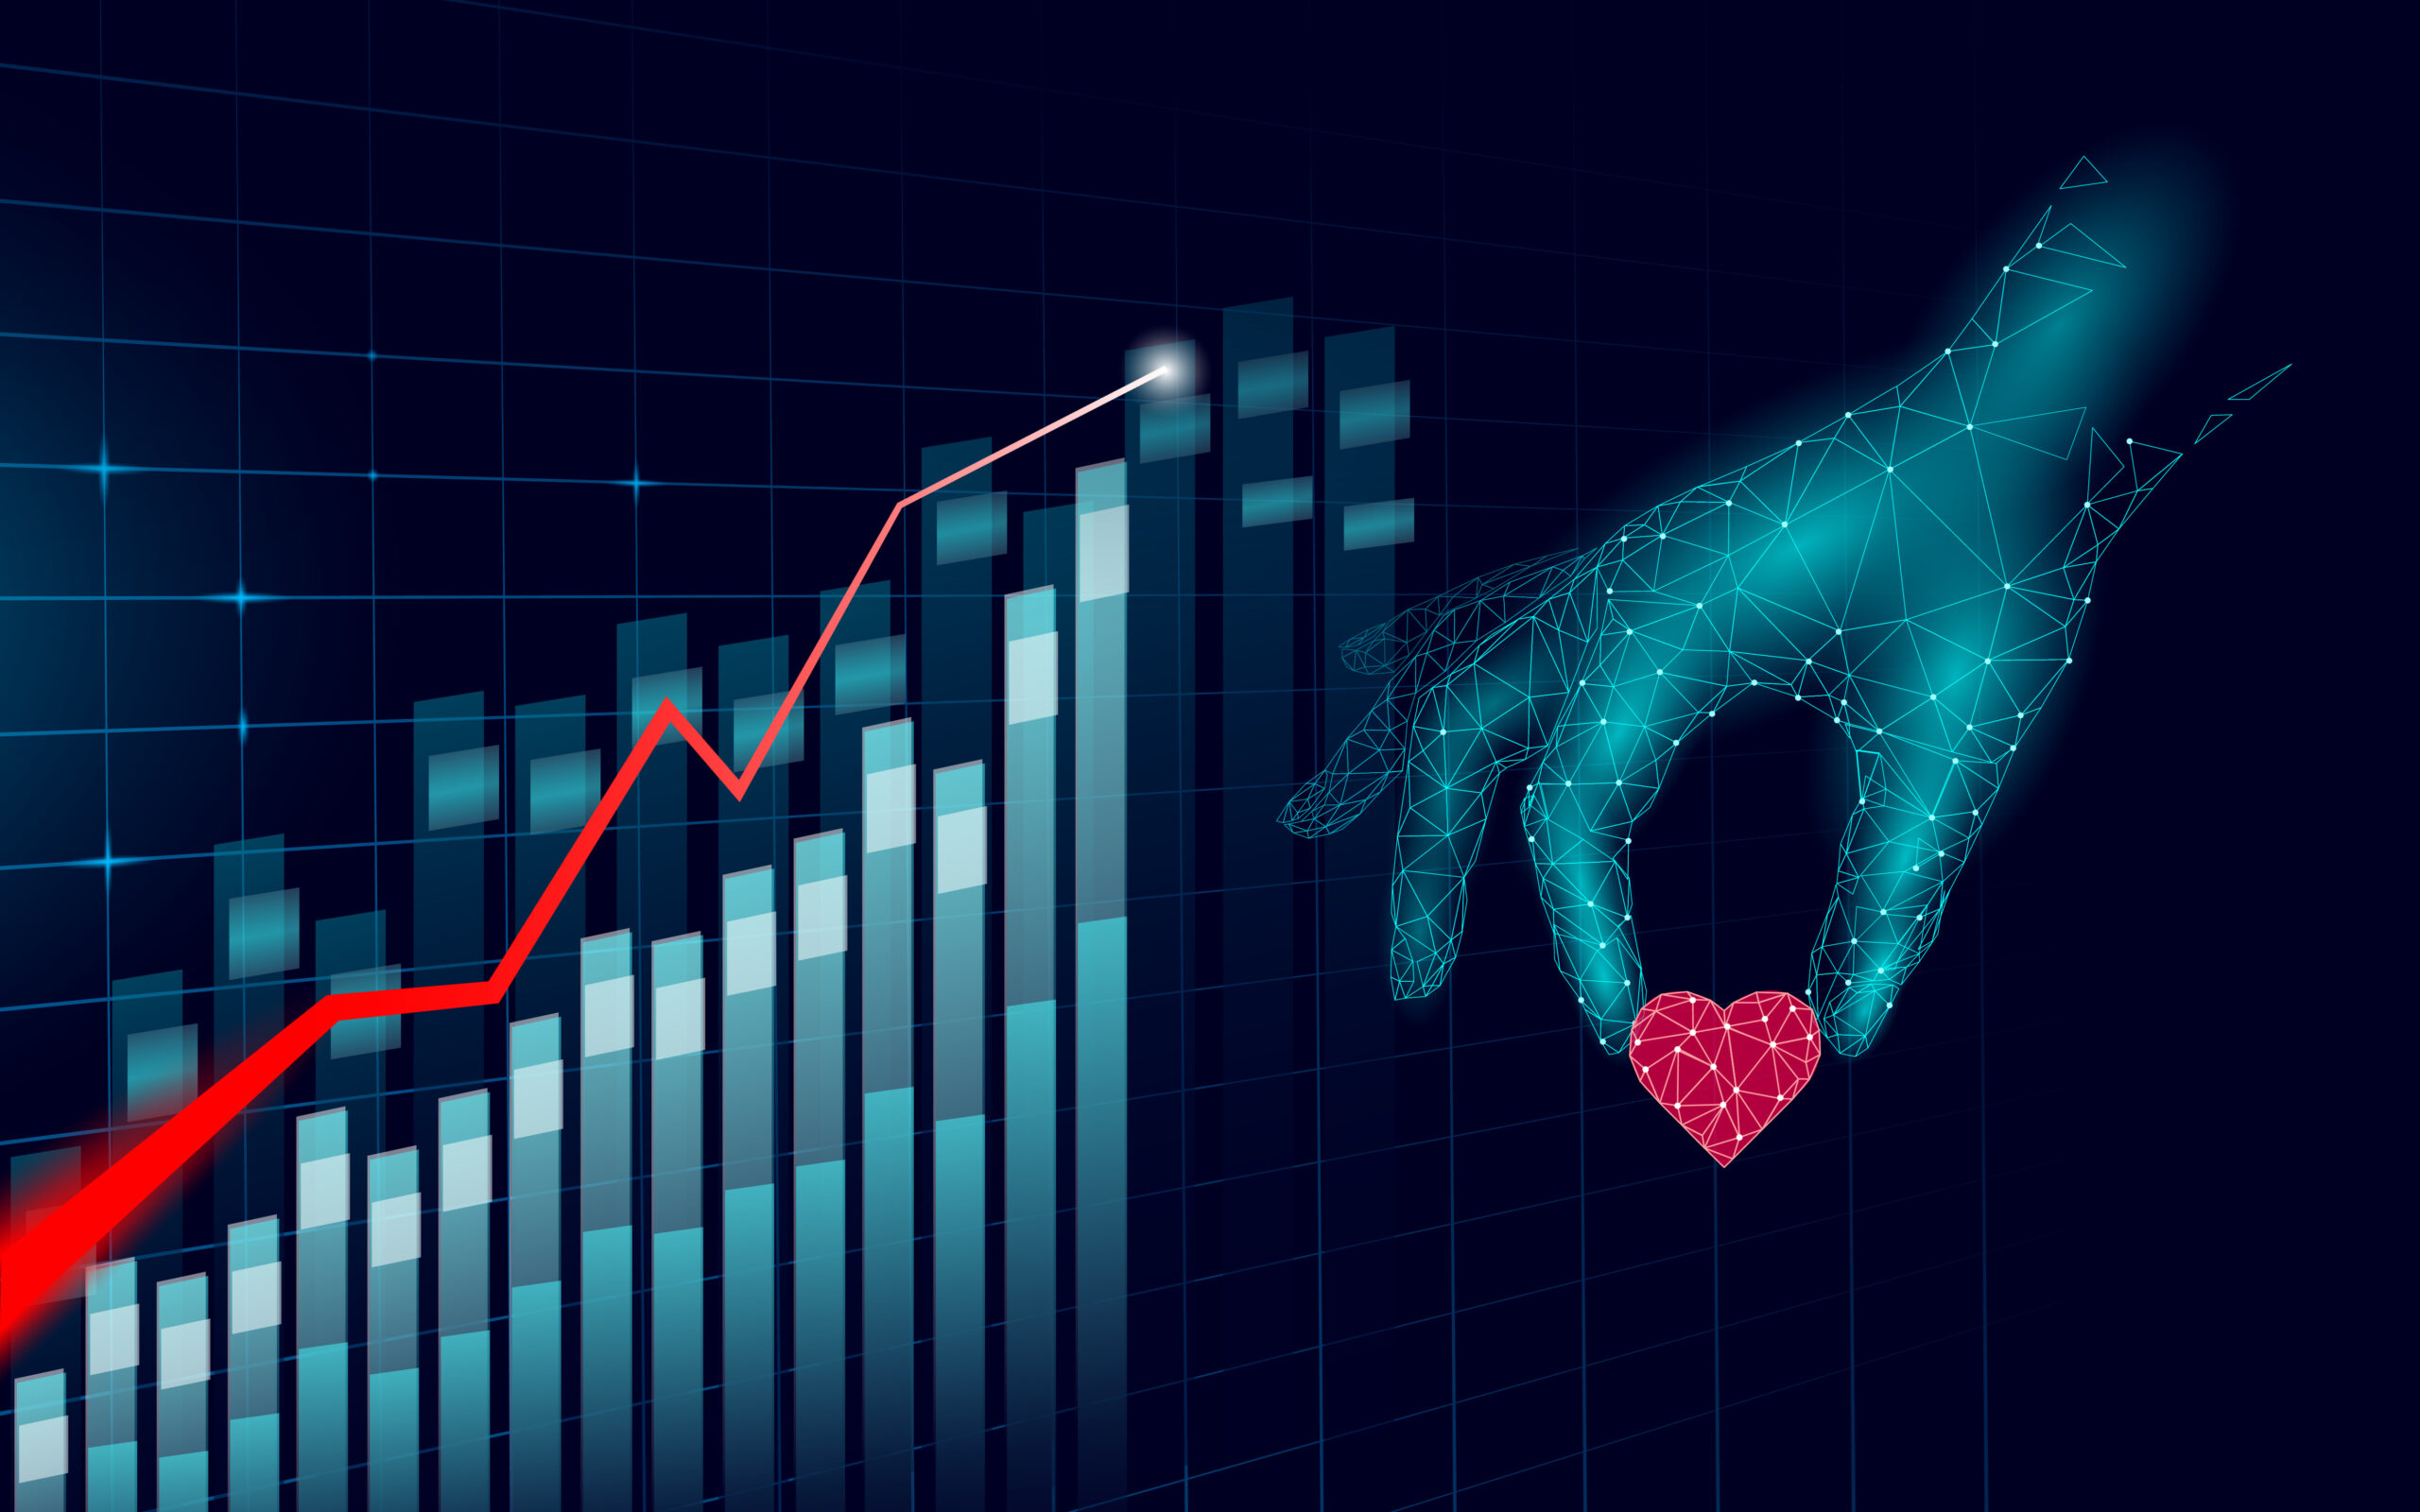 Computer graphics of hand holding red heart and financial graph trending up to its left